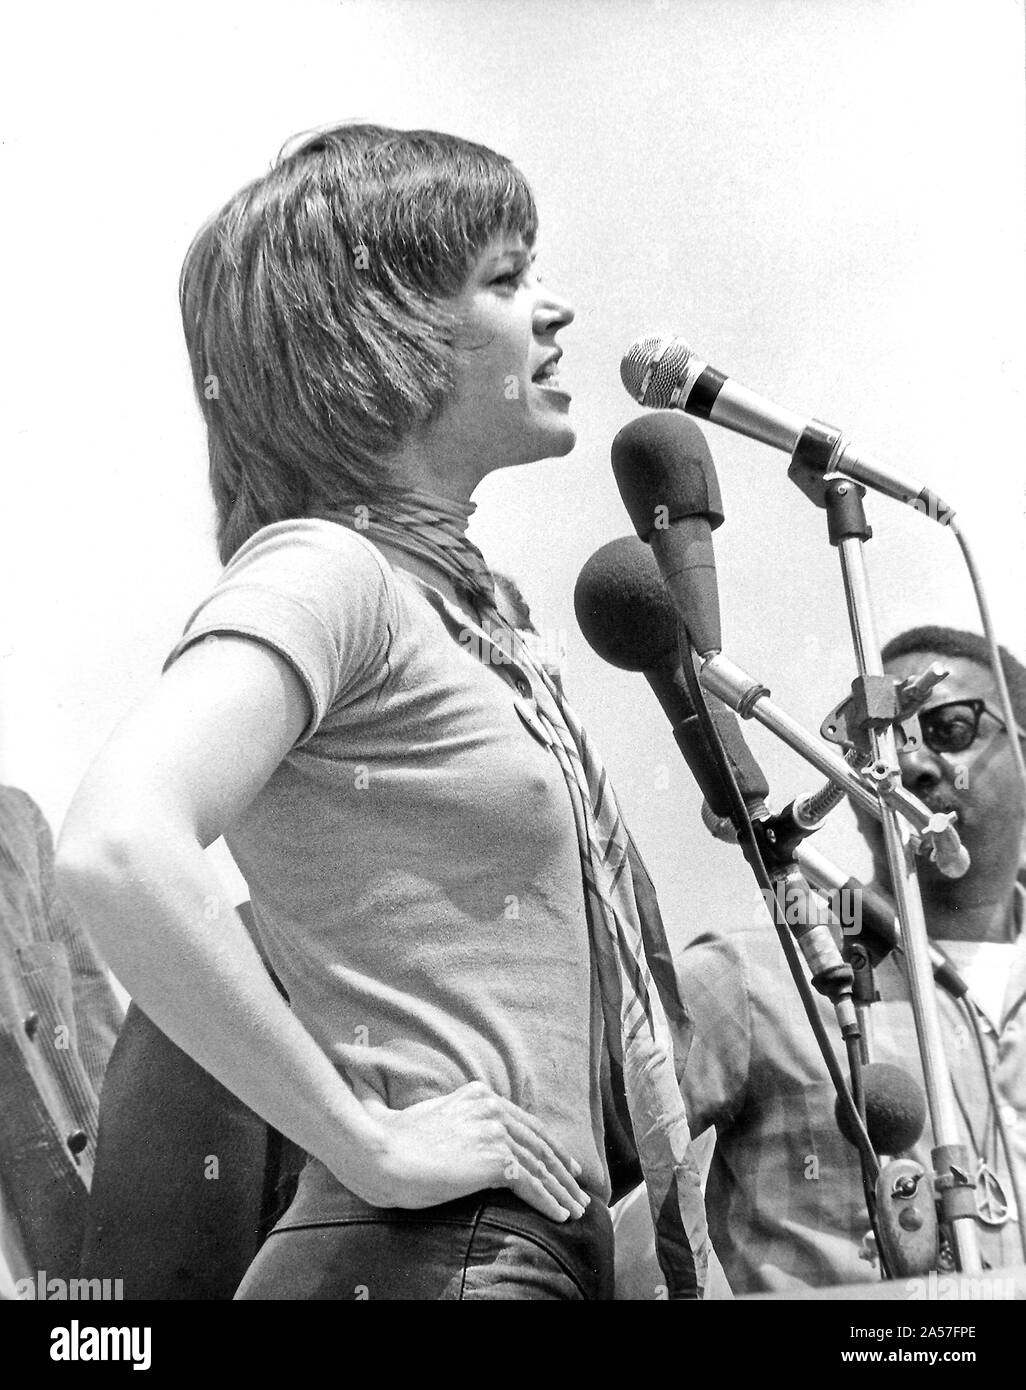 Washington, District of Columbia, USA. 9th May, 1970. Actress Jane Fonda is shown as she addressed the estimated 100,000 people who attended the anti-war rally by the White House. The Demonstration was generally non-violent save for scattered outbreaks along Pennsylvania Avenue near the Department of Justice Building in Washington, DC on May 9, 1970 Credit: Benjamin E. ''Gene'' Forte/CNP/ZUMA Wire/Alamy Live News Stock Photo